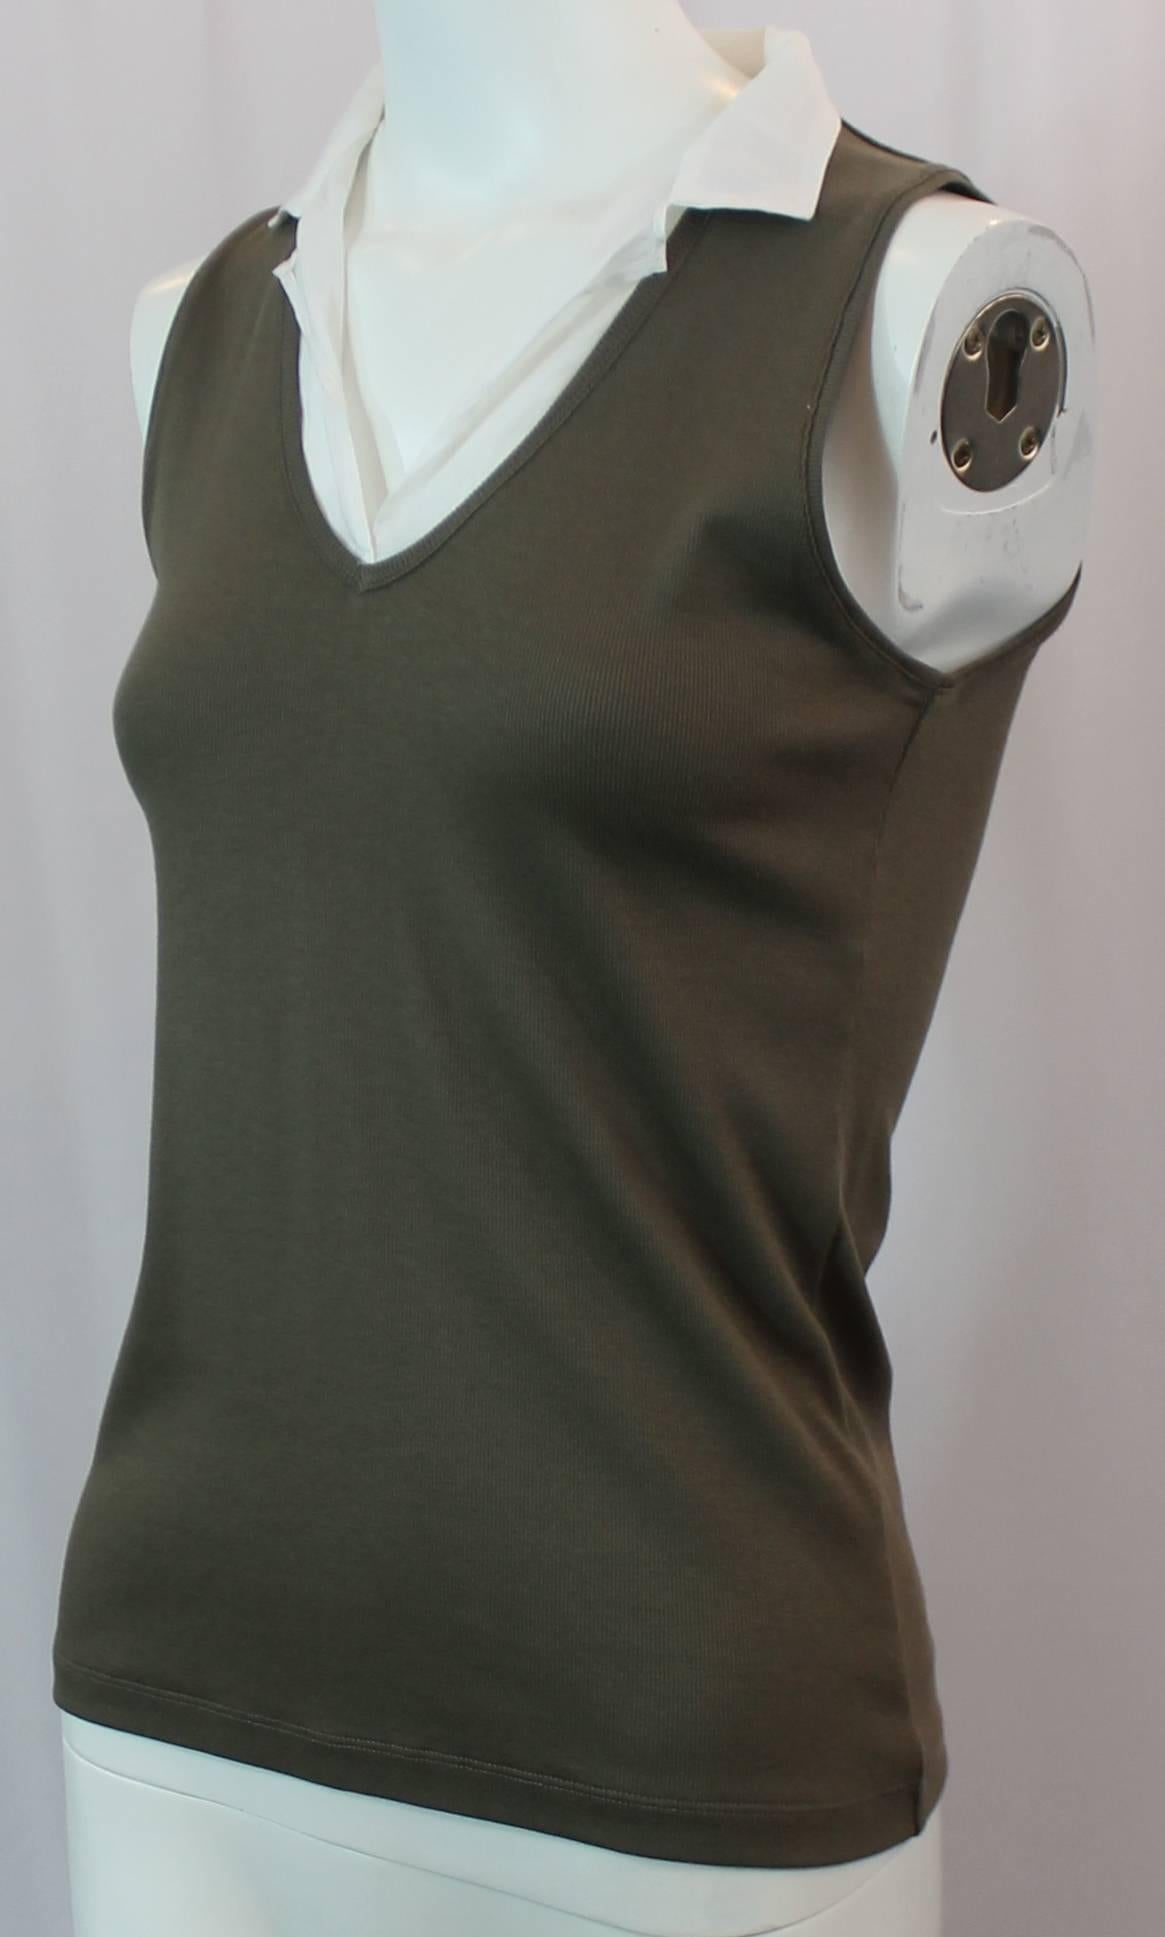 Brunello Cucinelli Olive and White Cotton Blend Sleeveless Top - L. This sleeveless top has a white collar. It appears to be a knitted olive vest on top of a white shirt but it's one piece. This top is in very good condition with light general